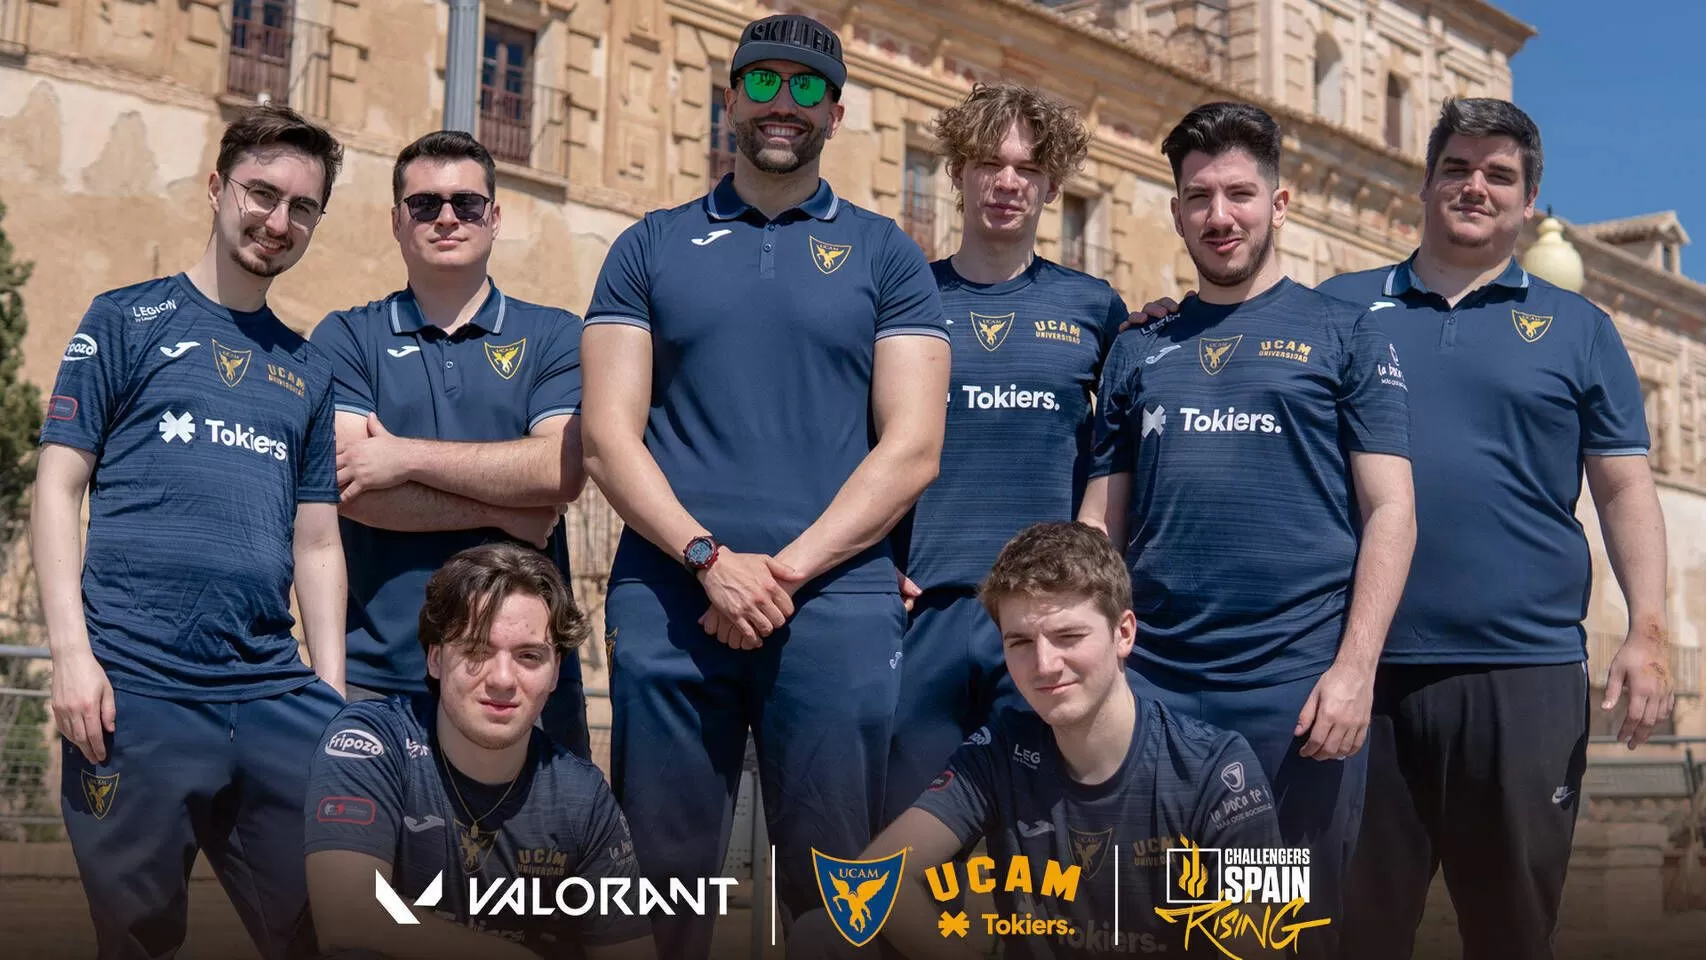 UCAM Tokiers will maintain its entire Valorant team